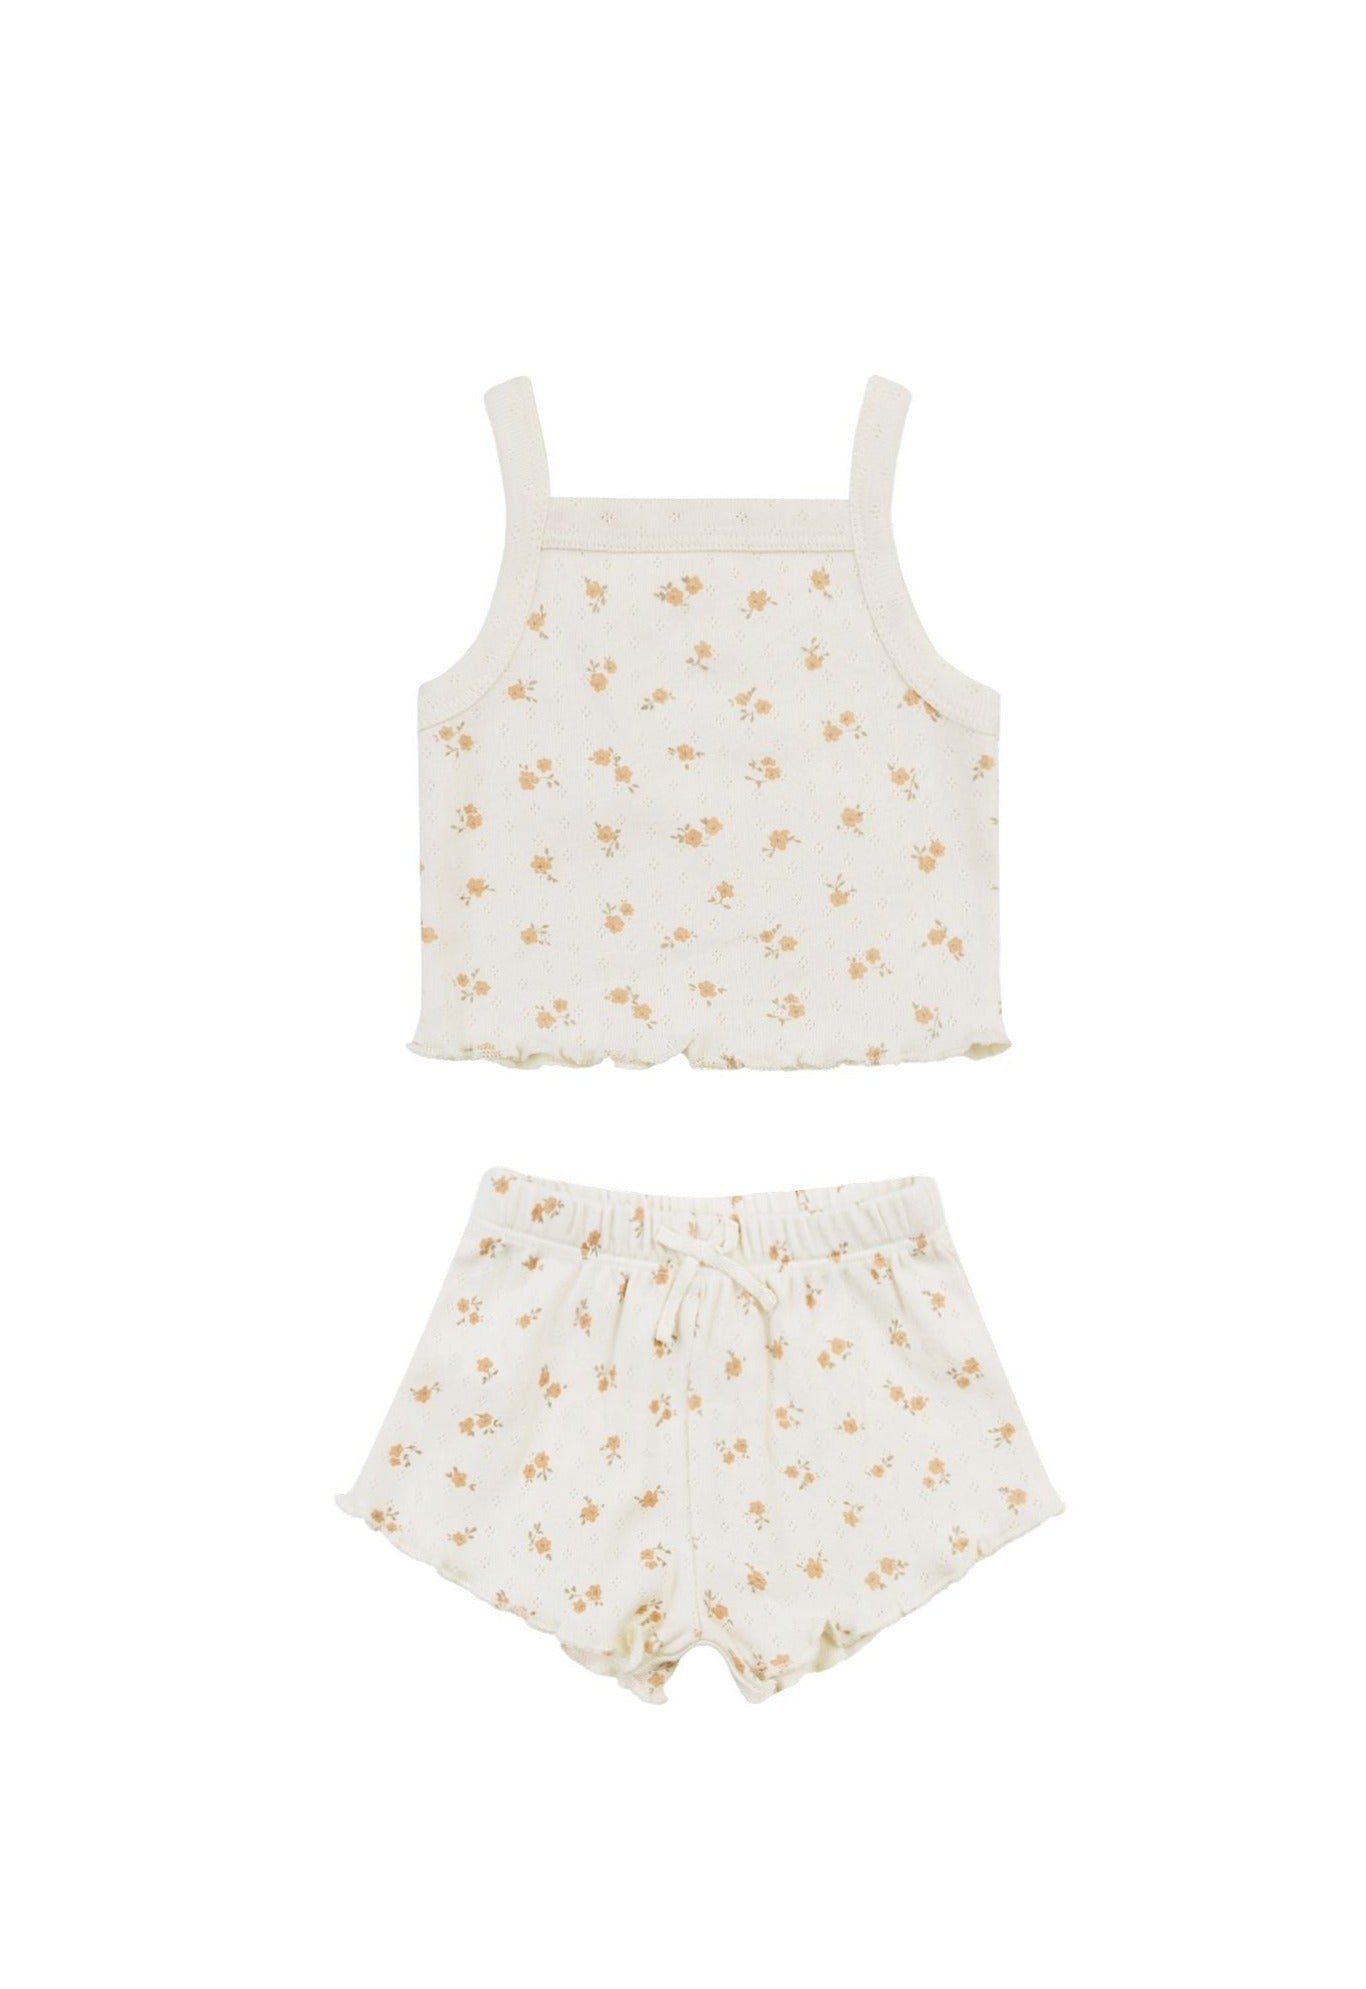 The Pointelle Tank + Shortie SET by Quincy Mae - Floral Melon